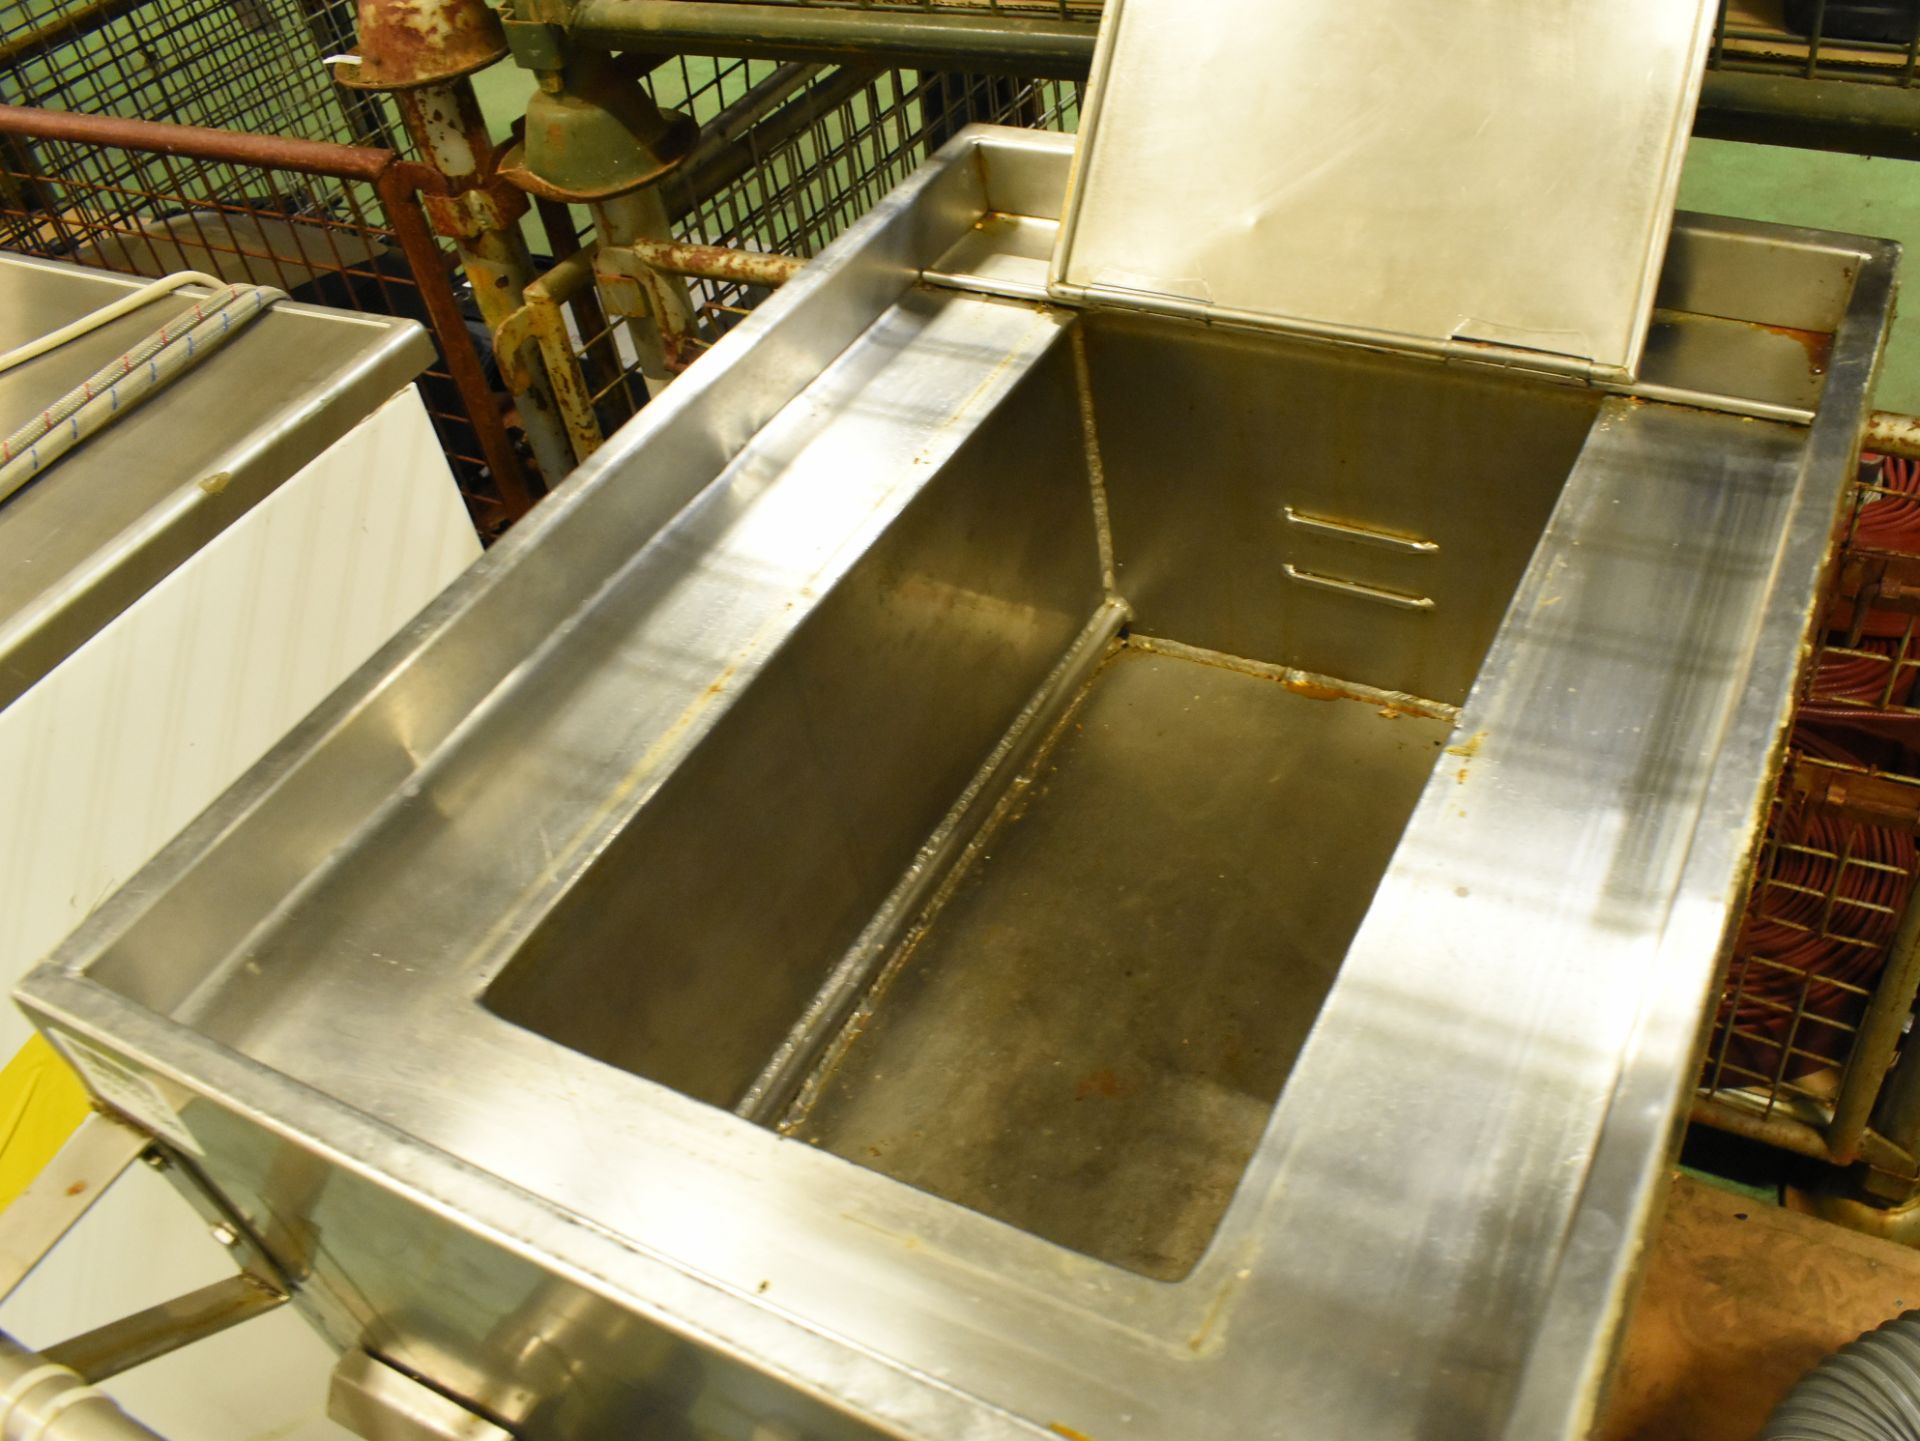 Henry Nuttall 010042 stainless steel deep fat fryer - 440V - W 500 x D 750 x H 960mm - Image 2 of 2